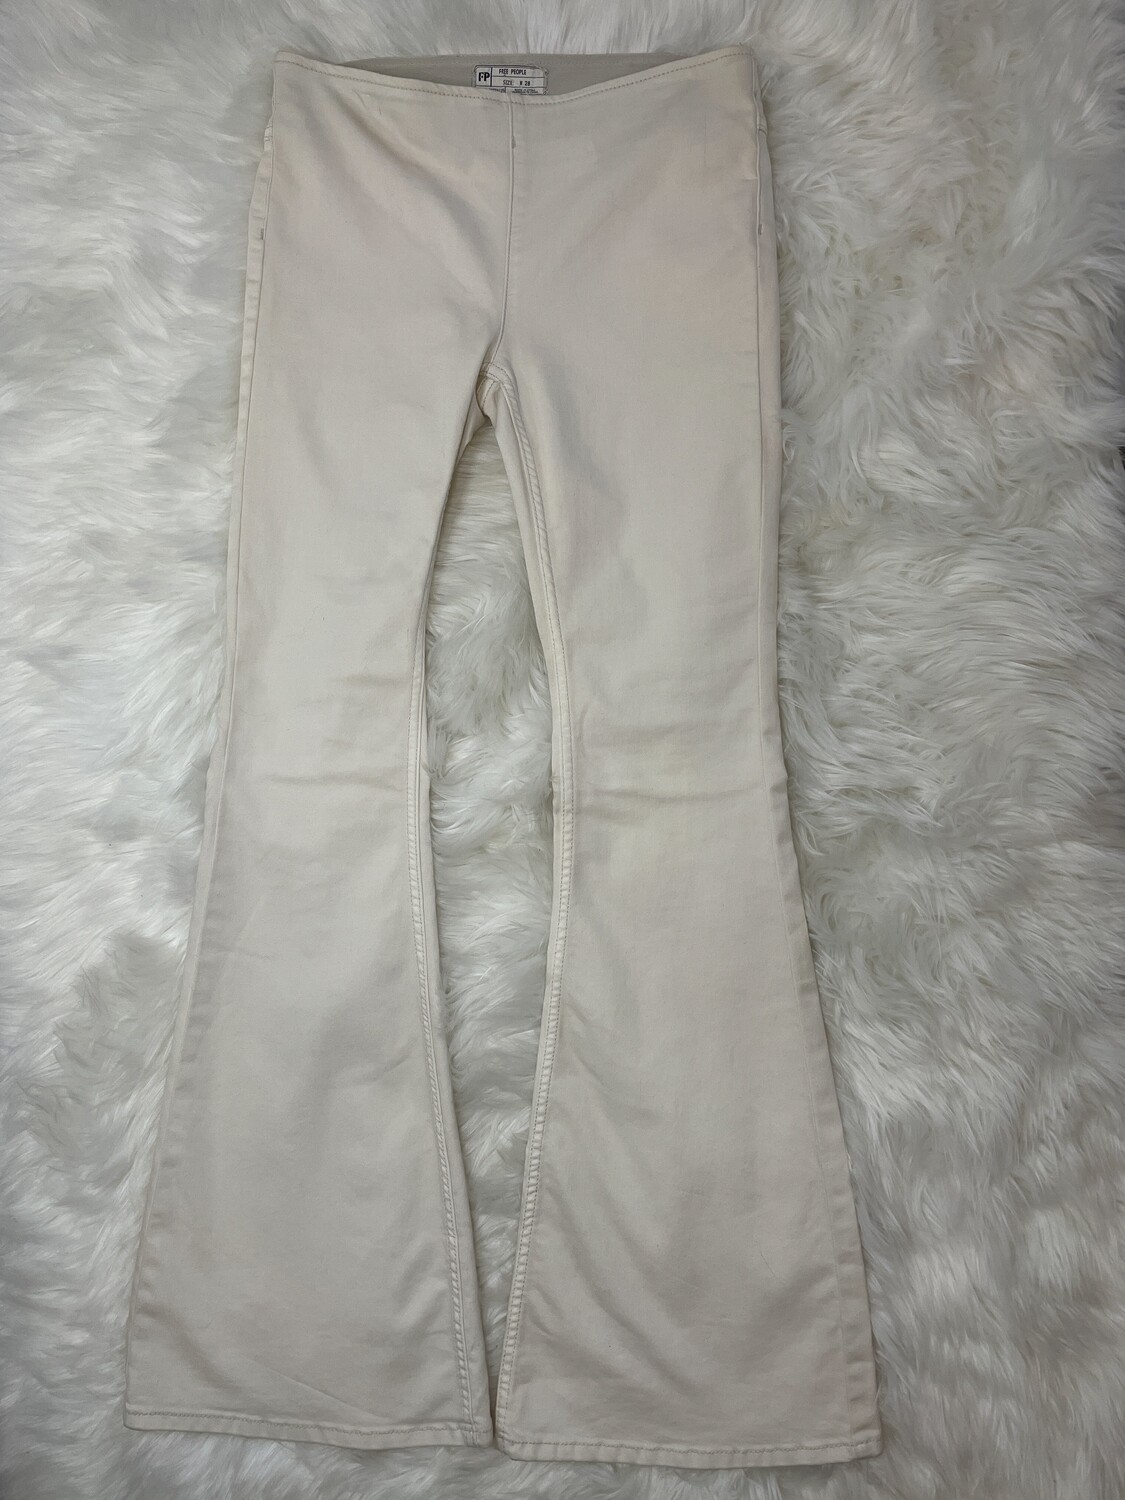 Free People Off White Flare Leg Pants - Size 28